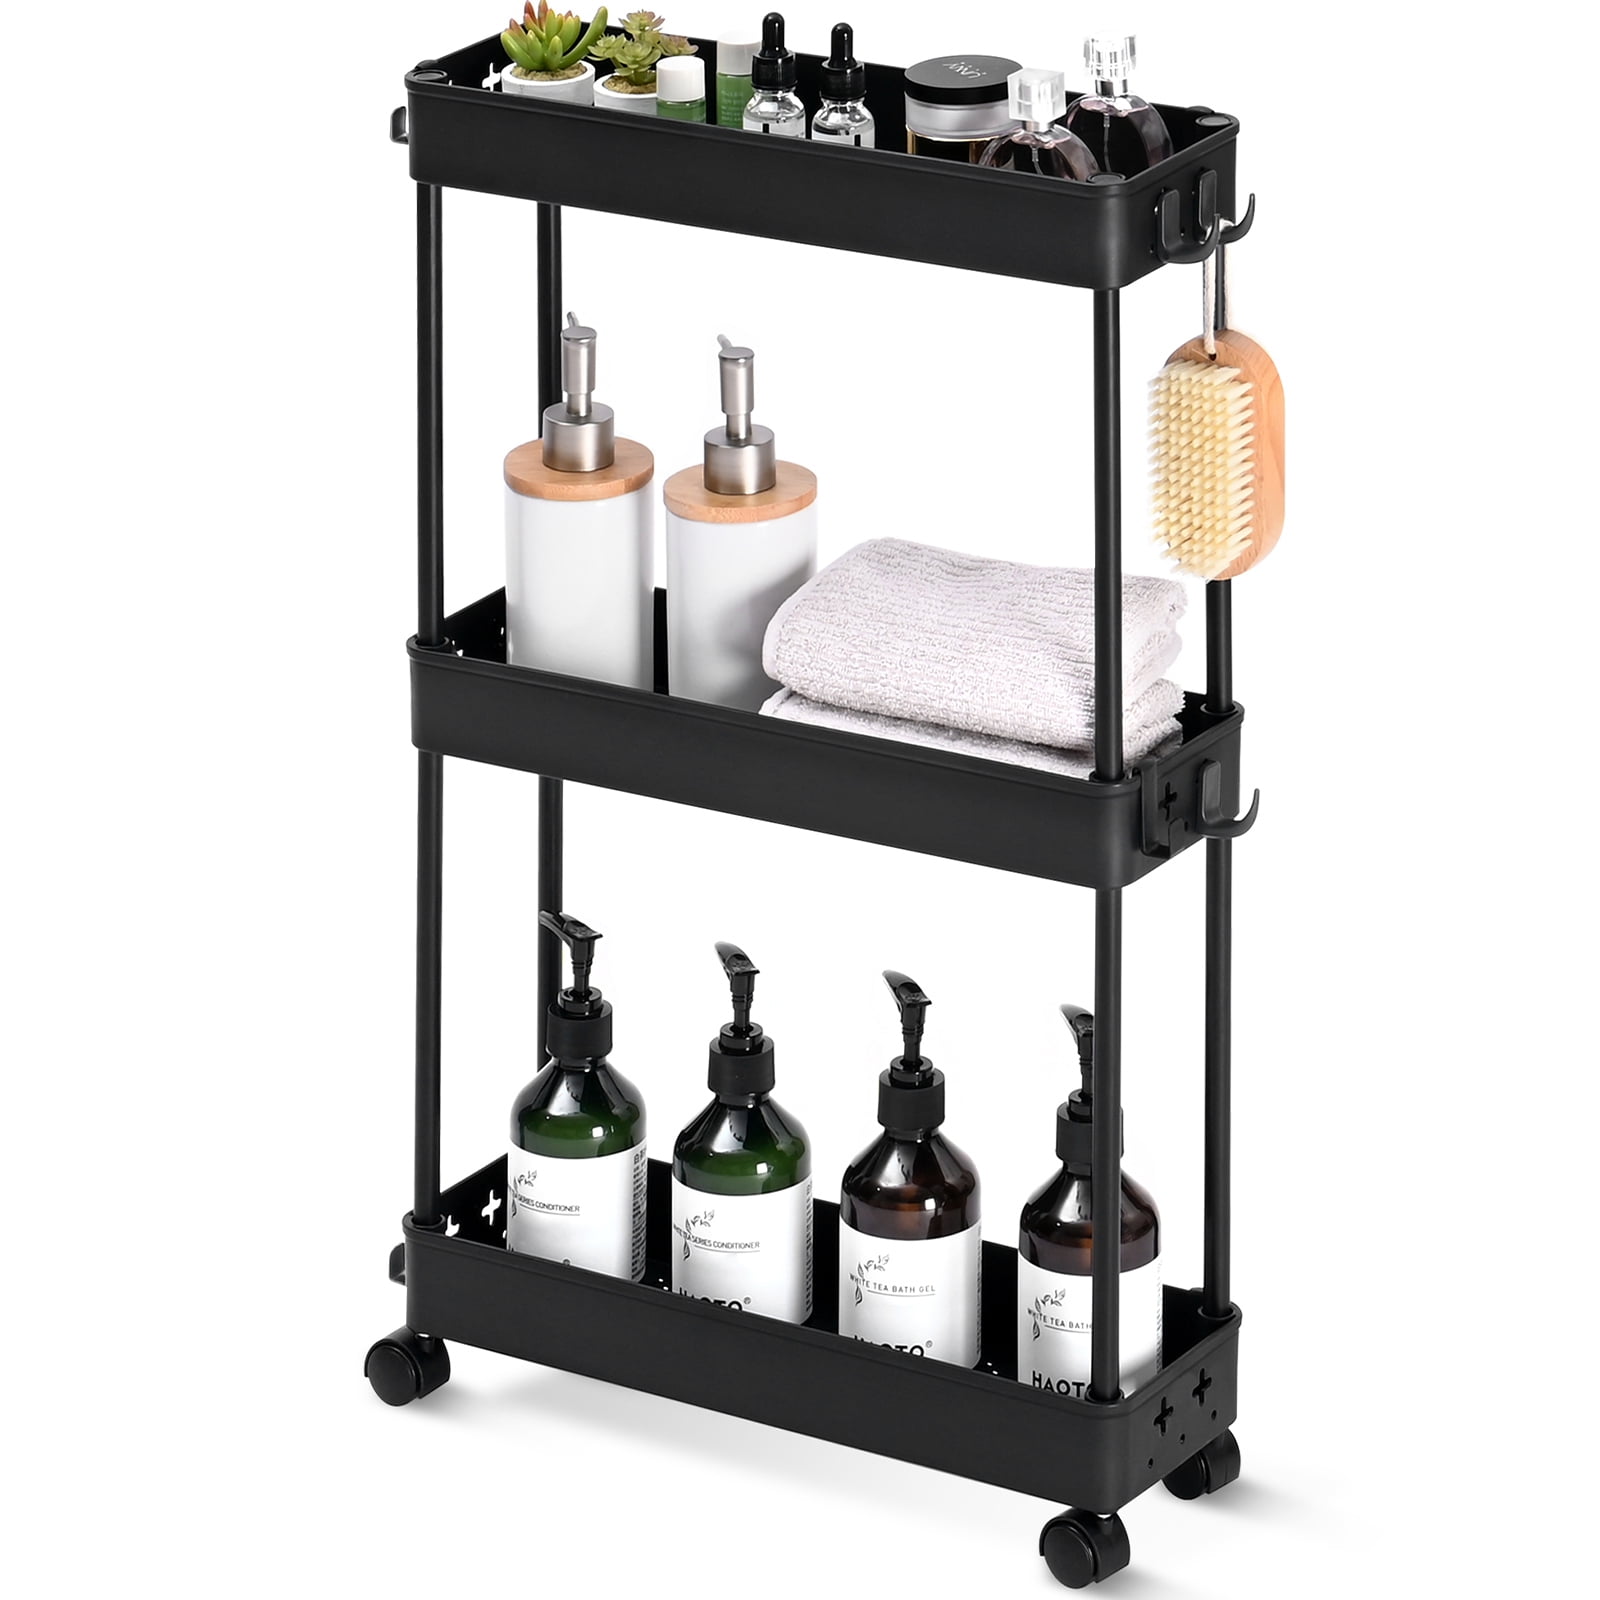 Dropship Free Shipping 3-Tire Rolling Cart Organizer Unit With Wheels Narrow  Slim Container Storage Cabinet For Bathroom Bedroom YJ to Sell Online at a  Lower Price